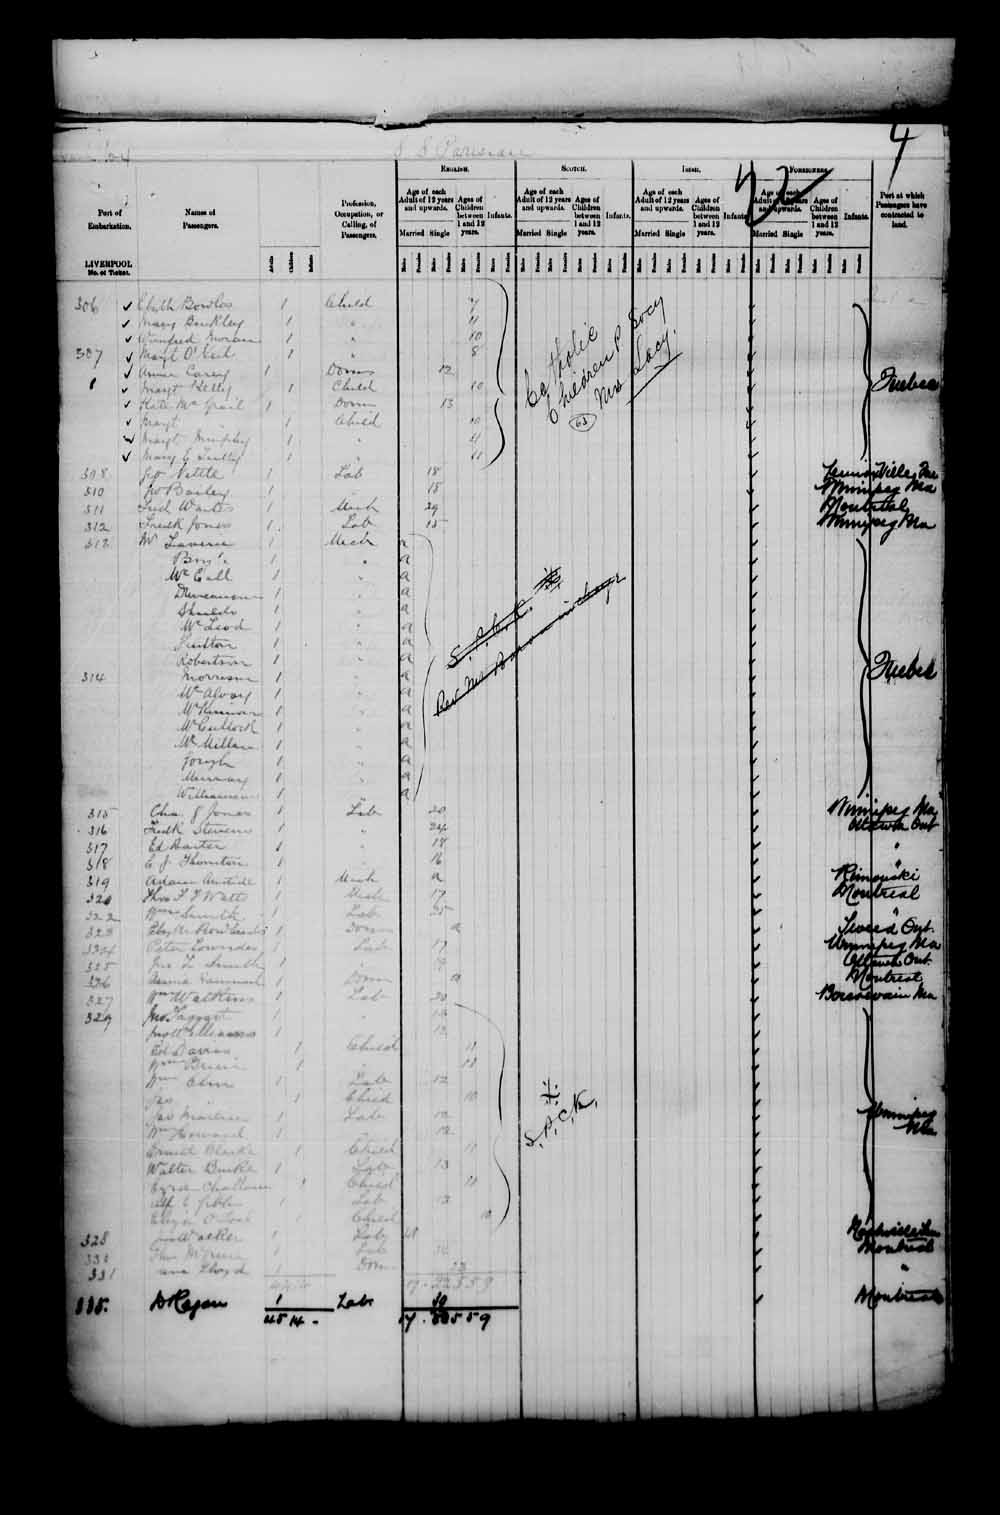 Digitized page of Passenger Lists for Image No.: e003549677